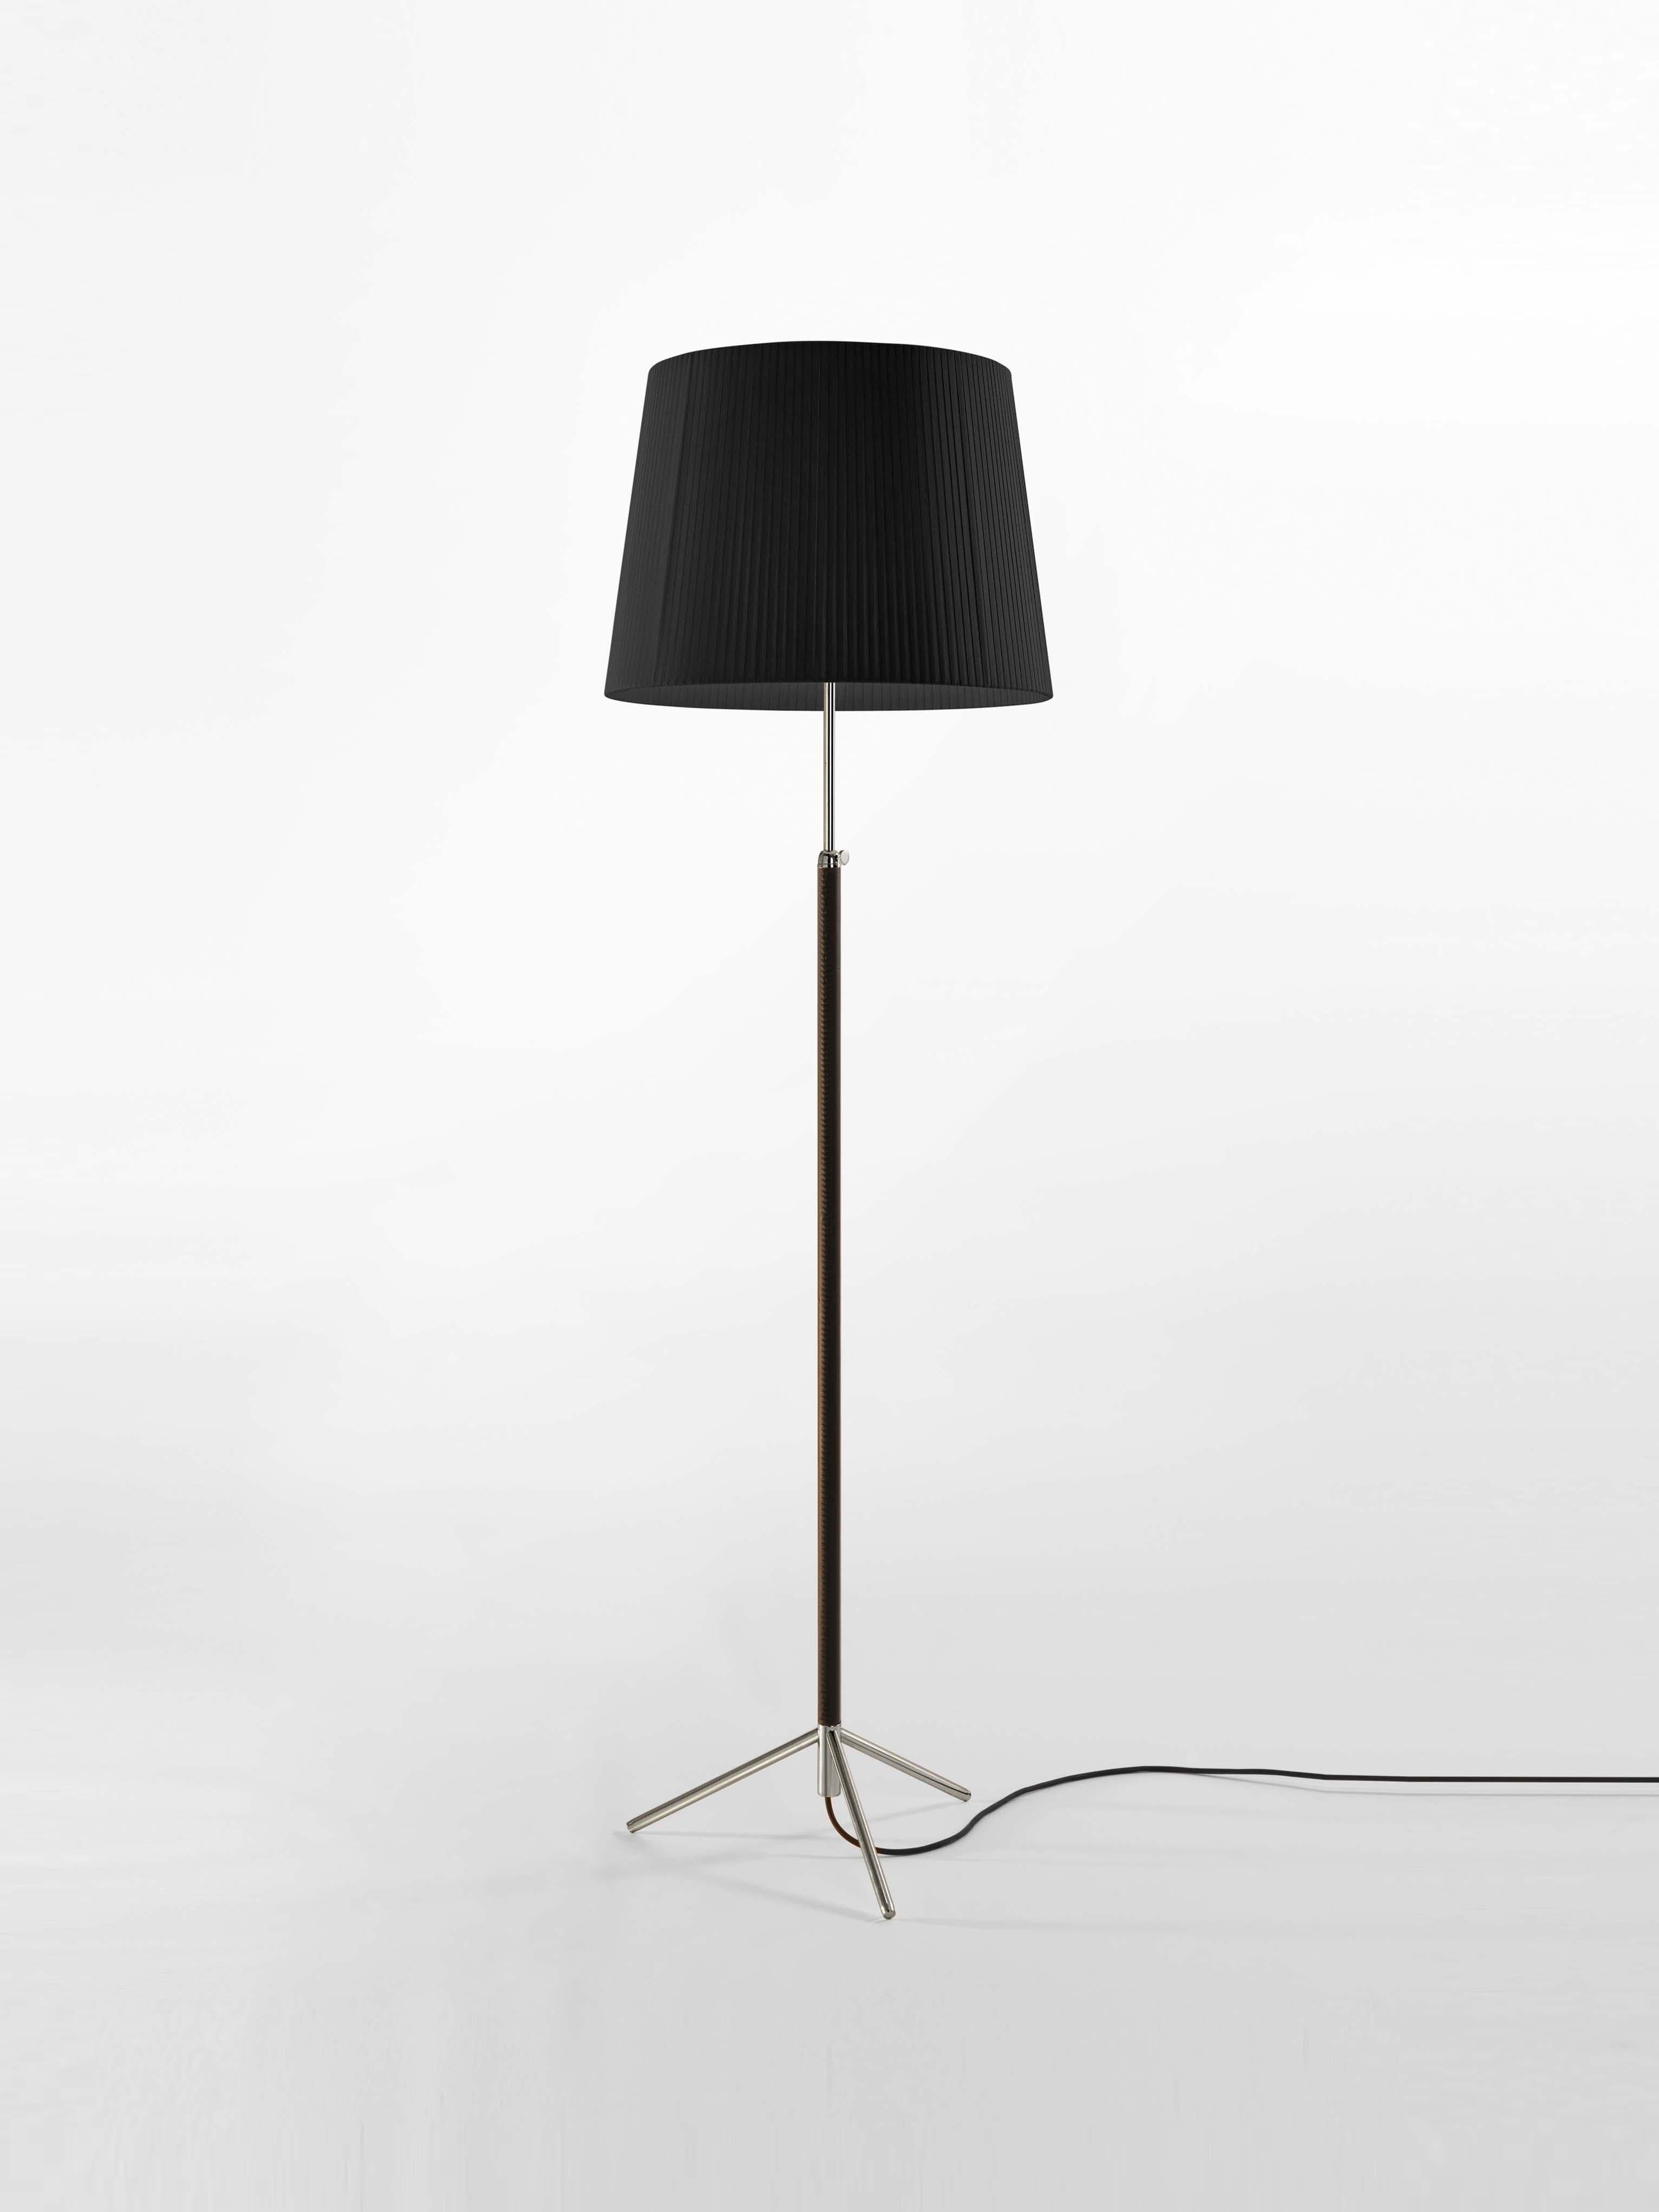 Black and chrome Pie de Salón G1 floor lamp by Jaume Sans
Dimensions: D 45 x H 120-160 cm.
Materials: Metal, leather, ribbon.
Available in chrome-plated or polished brass structure.
Available in other shade colors and sizes.

This slender